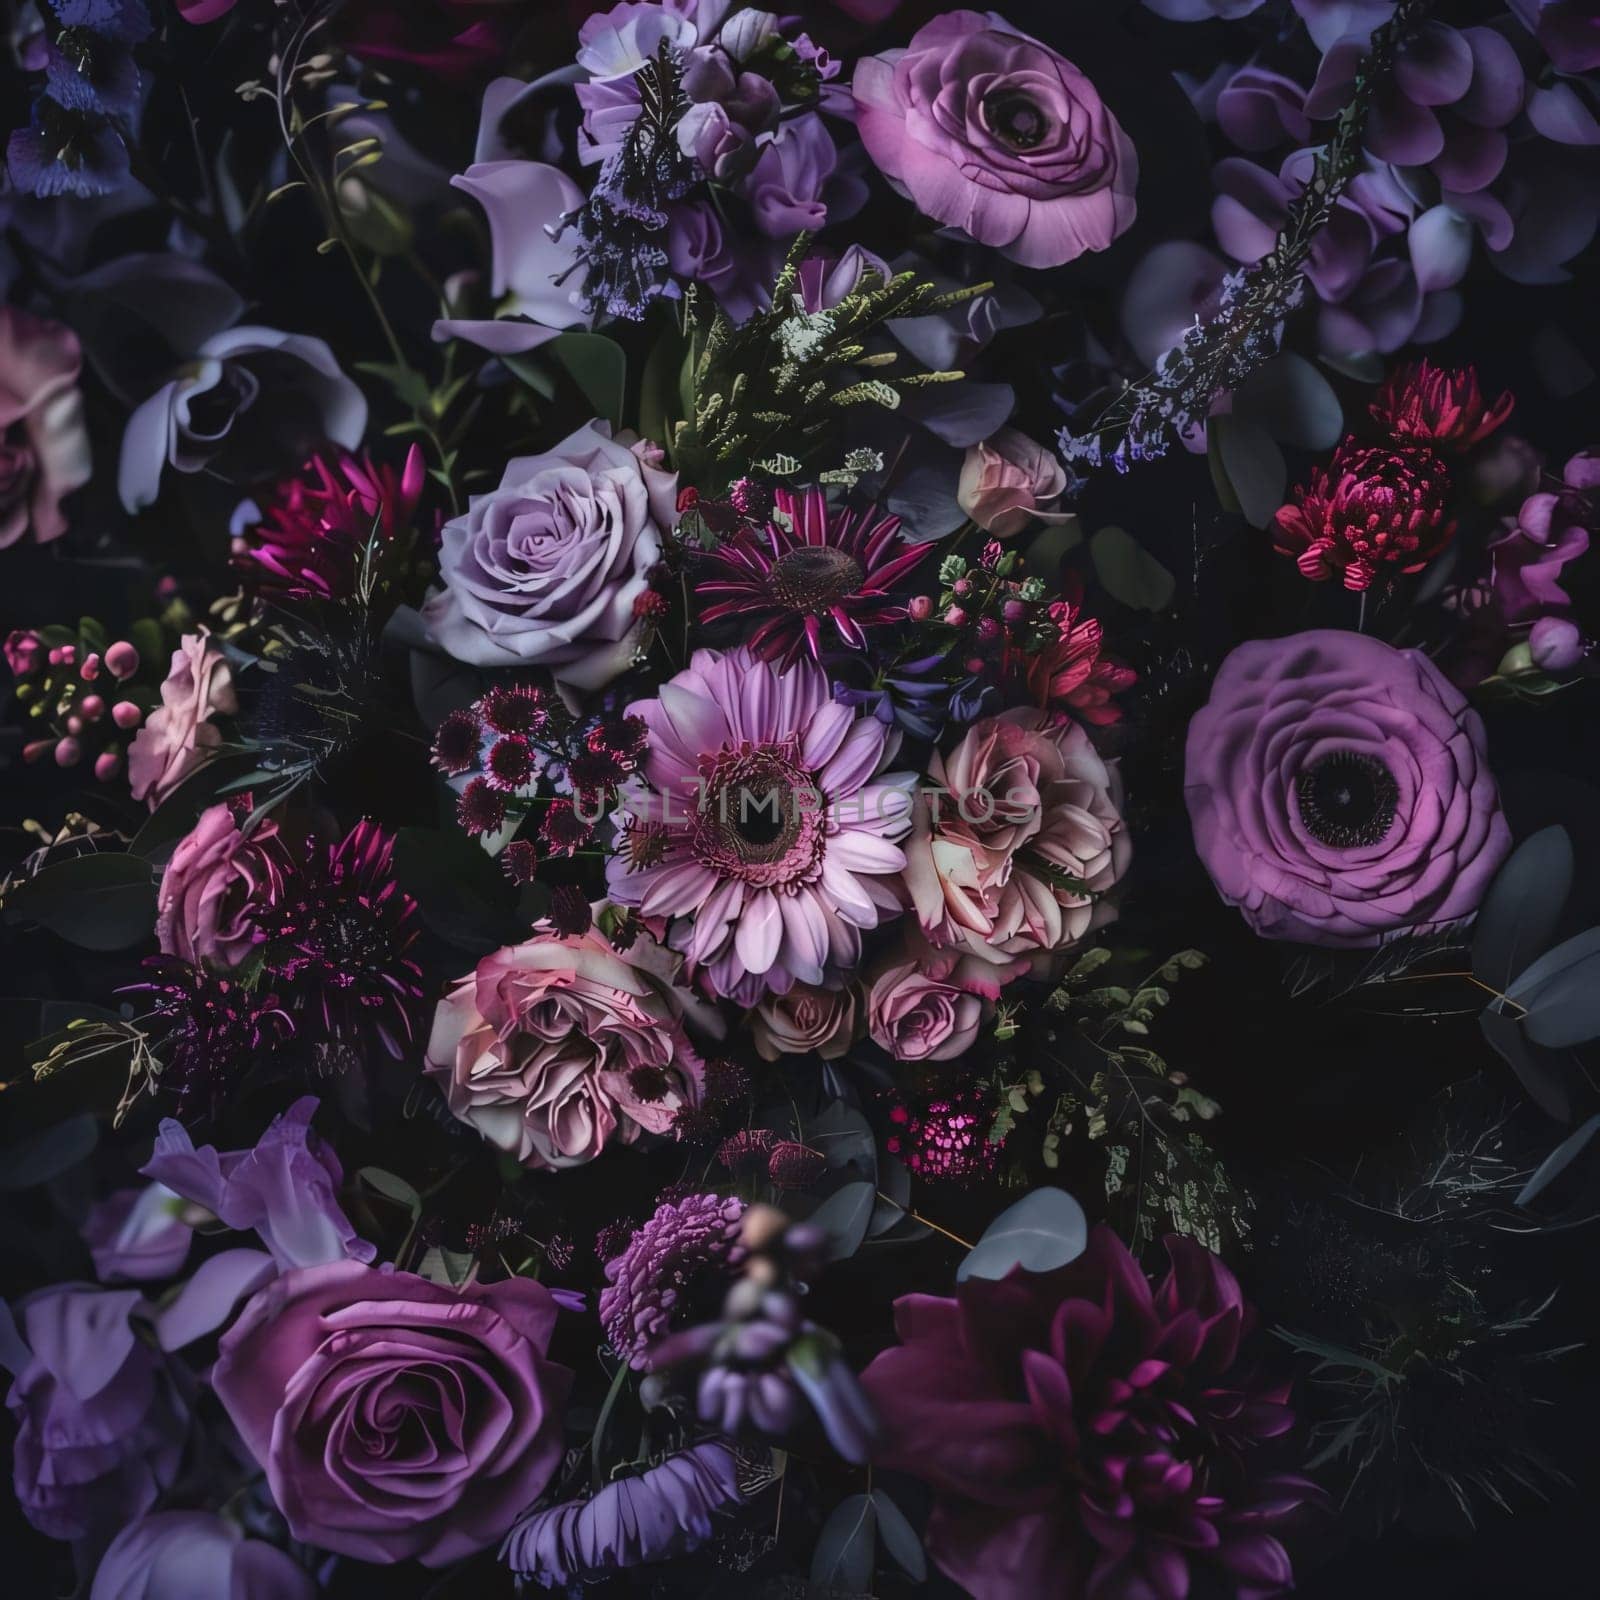 Bouquet of pink and purple flowers on a dark background. Flowering flowers, a symbol of spring, new life. A joyful time of nature waking up to life.